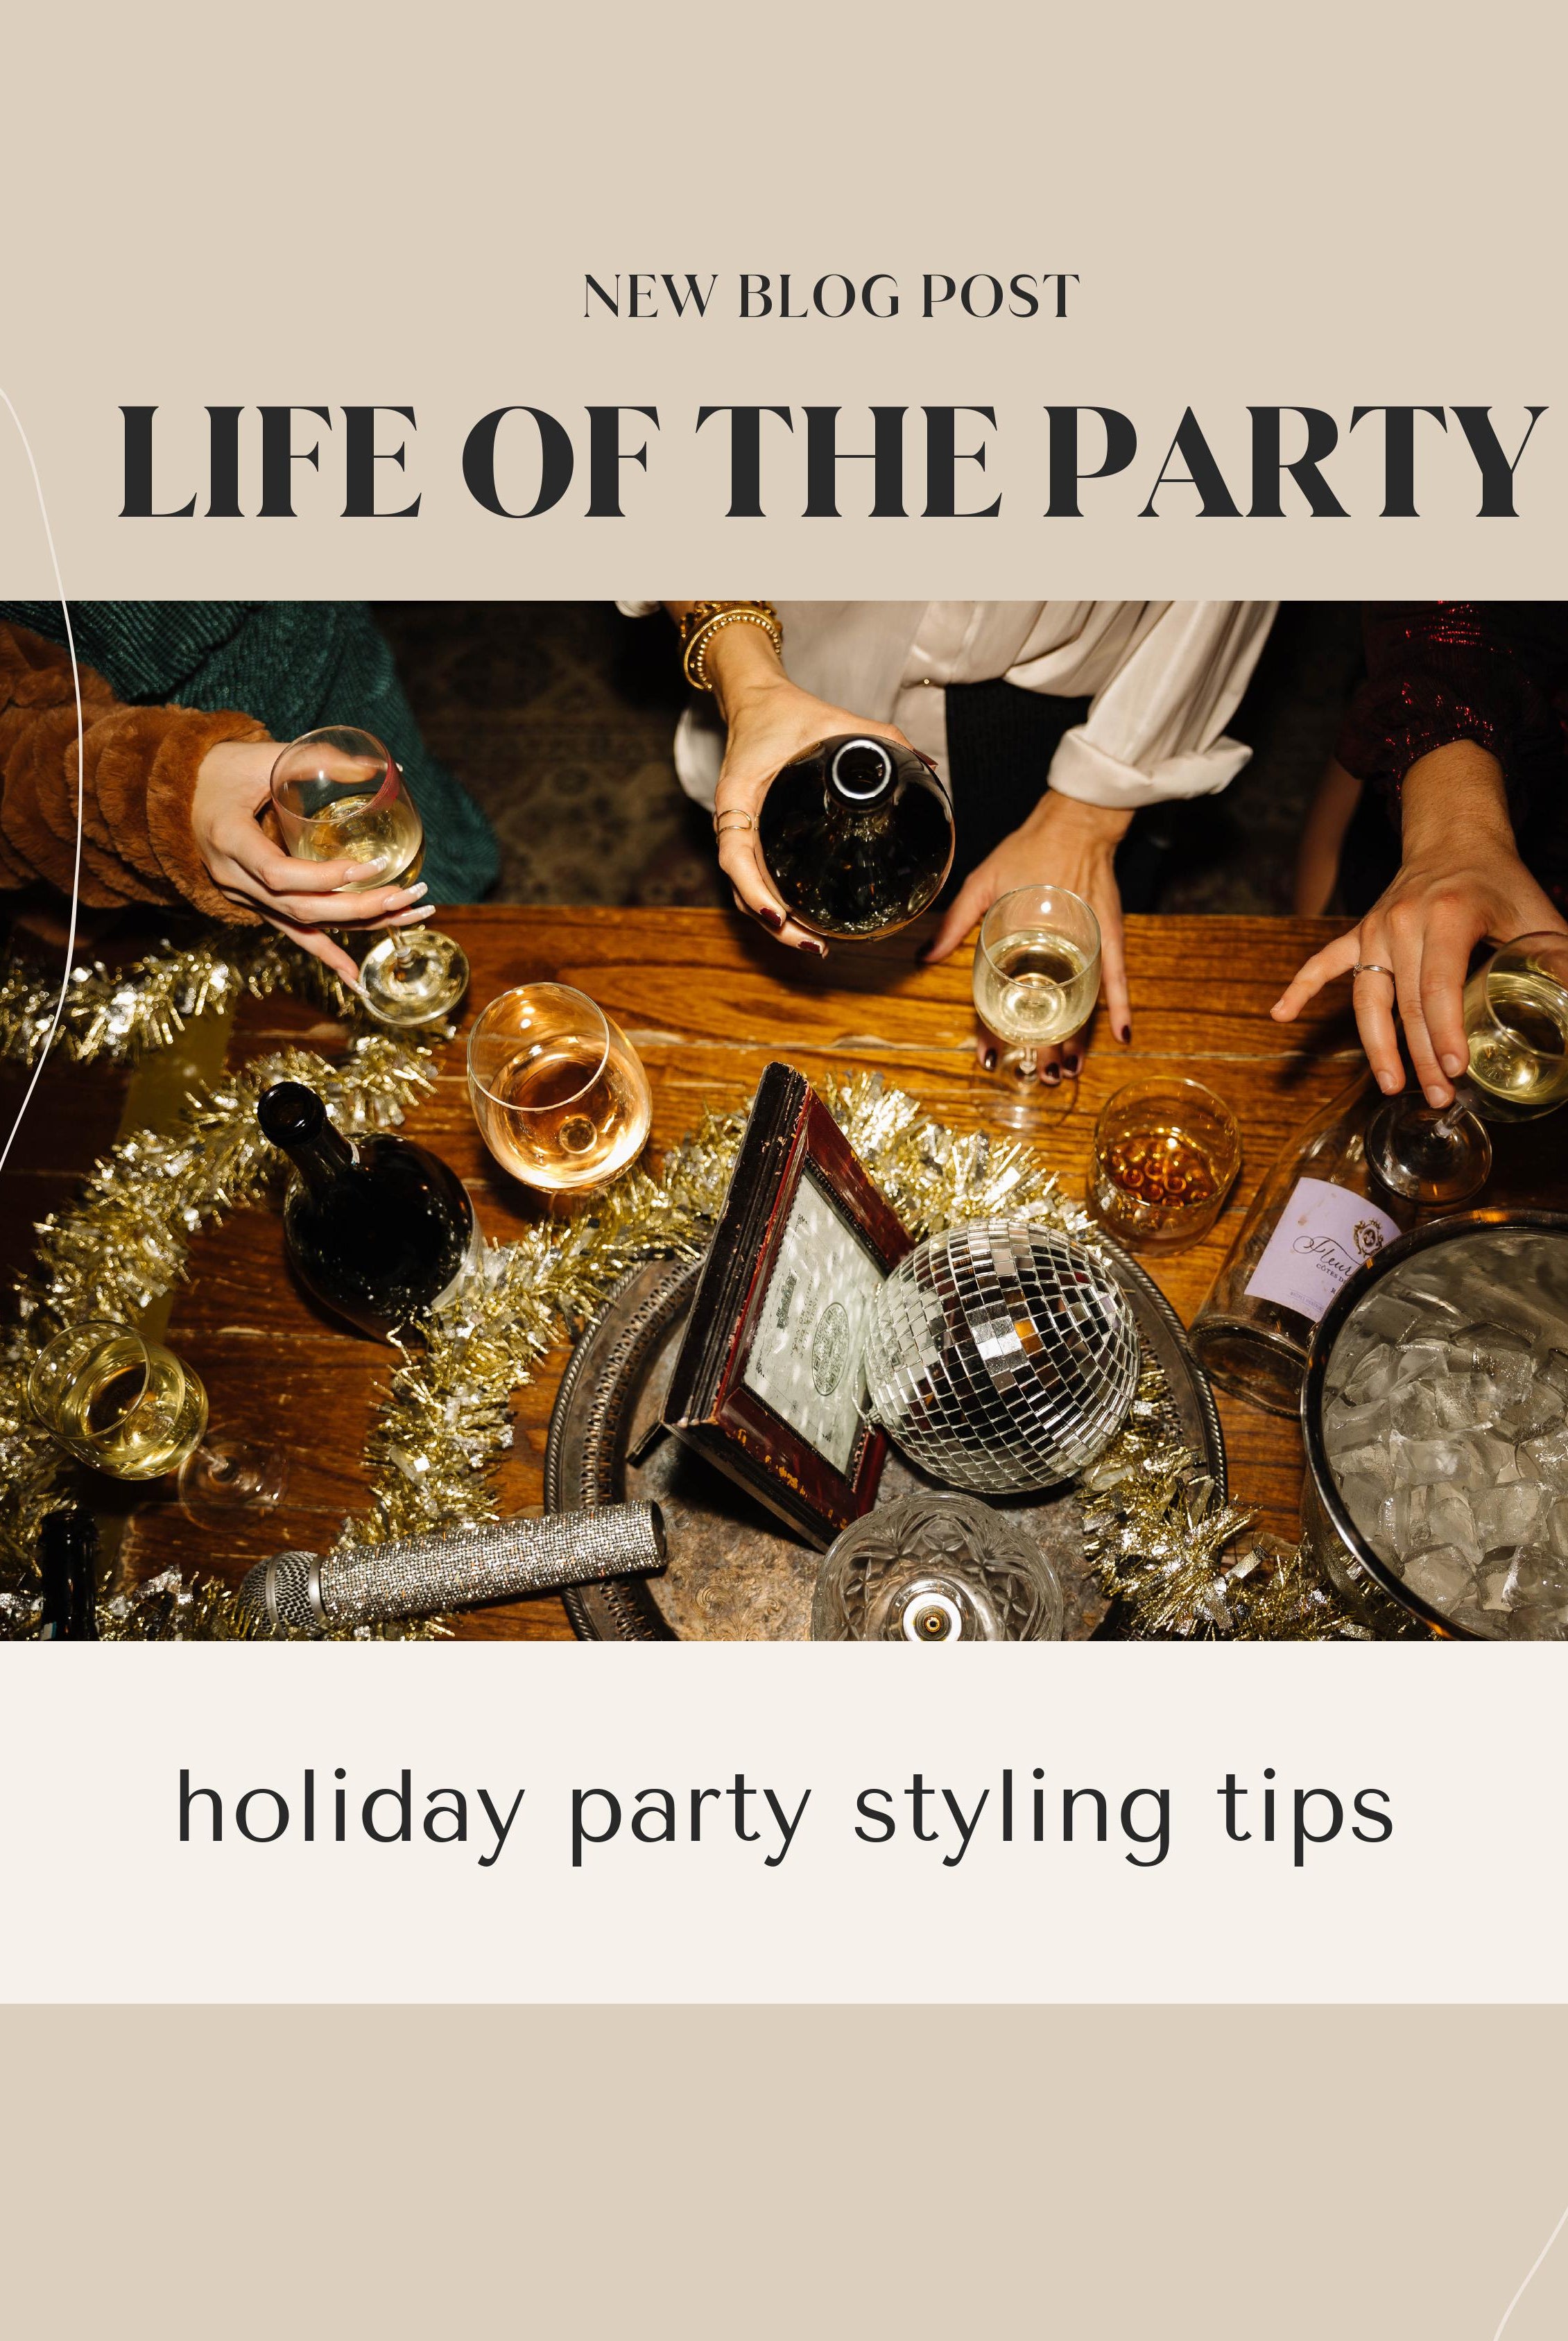 LIFE OF THE PARTY: HOLIDAY PARTY STYLE TIPS